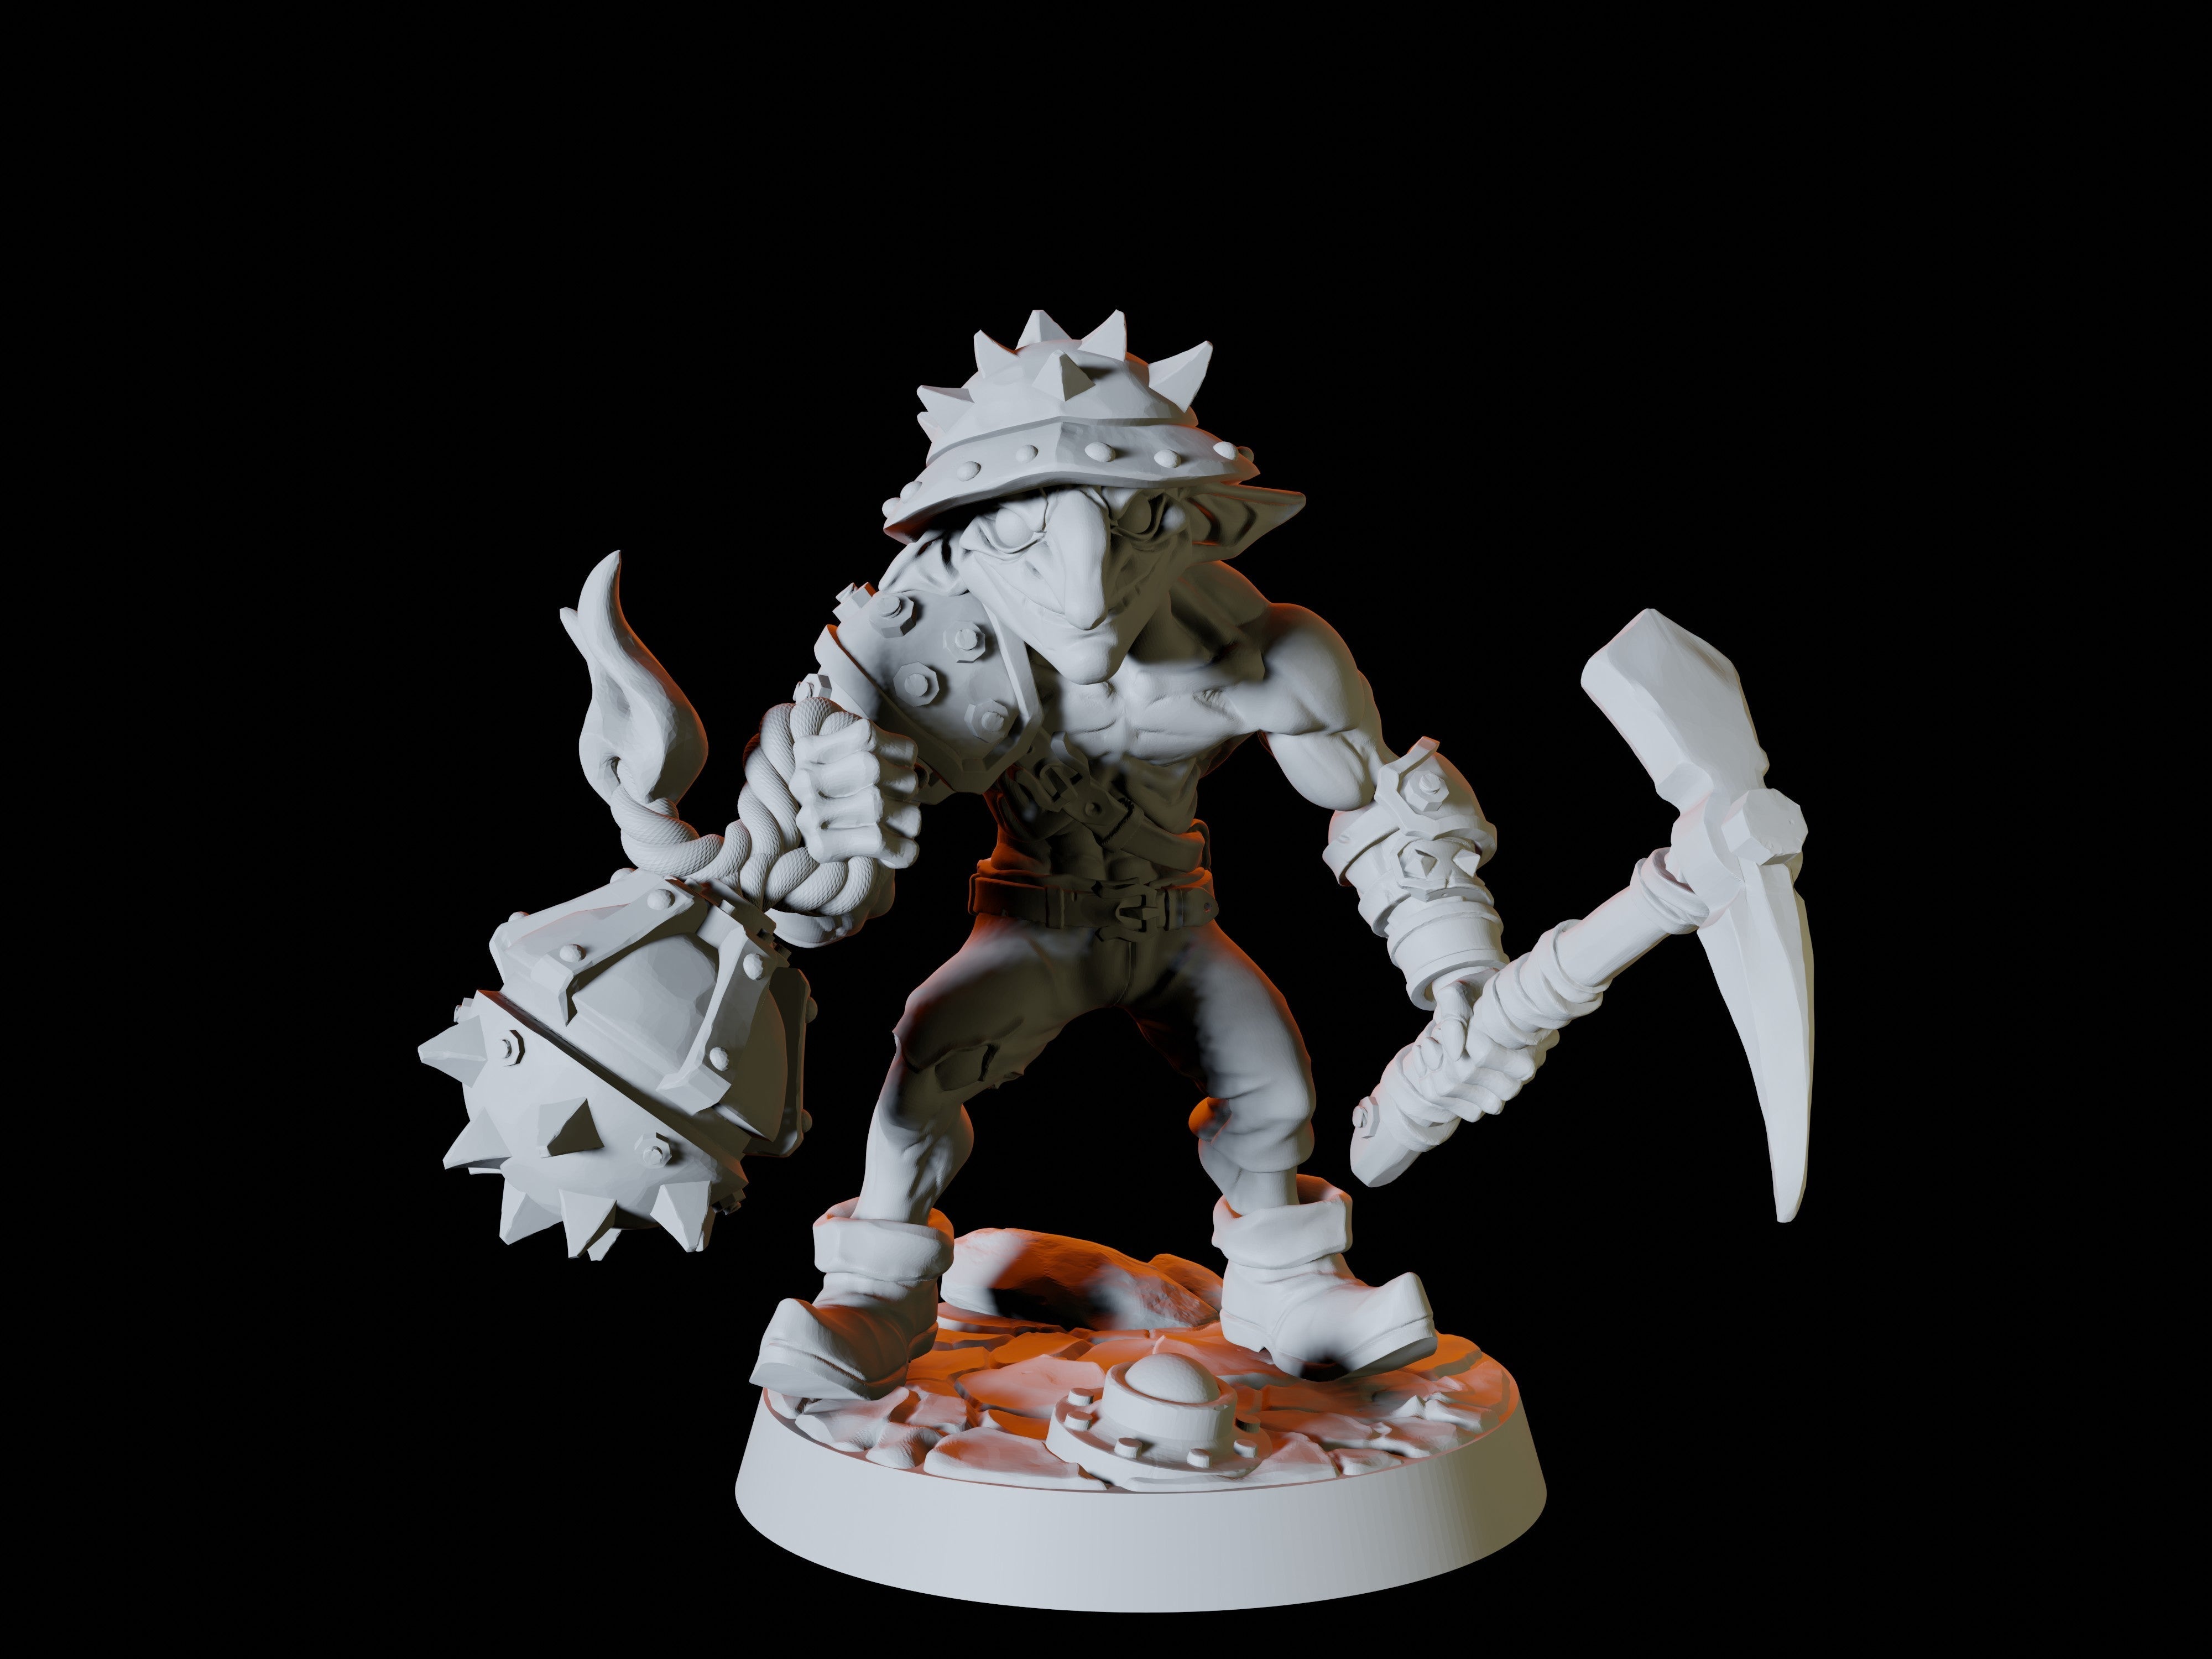 Goblin Army - Six Soldier Miniatures for Dungeons and Dragons